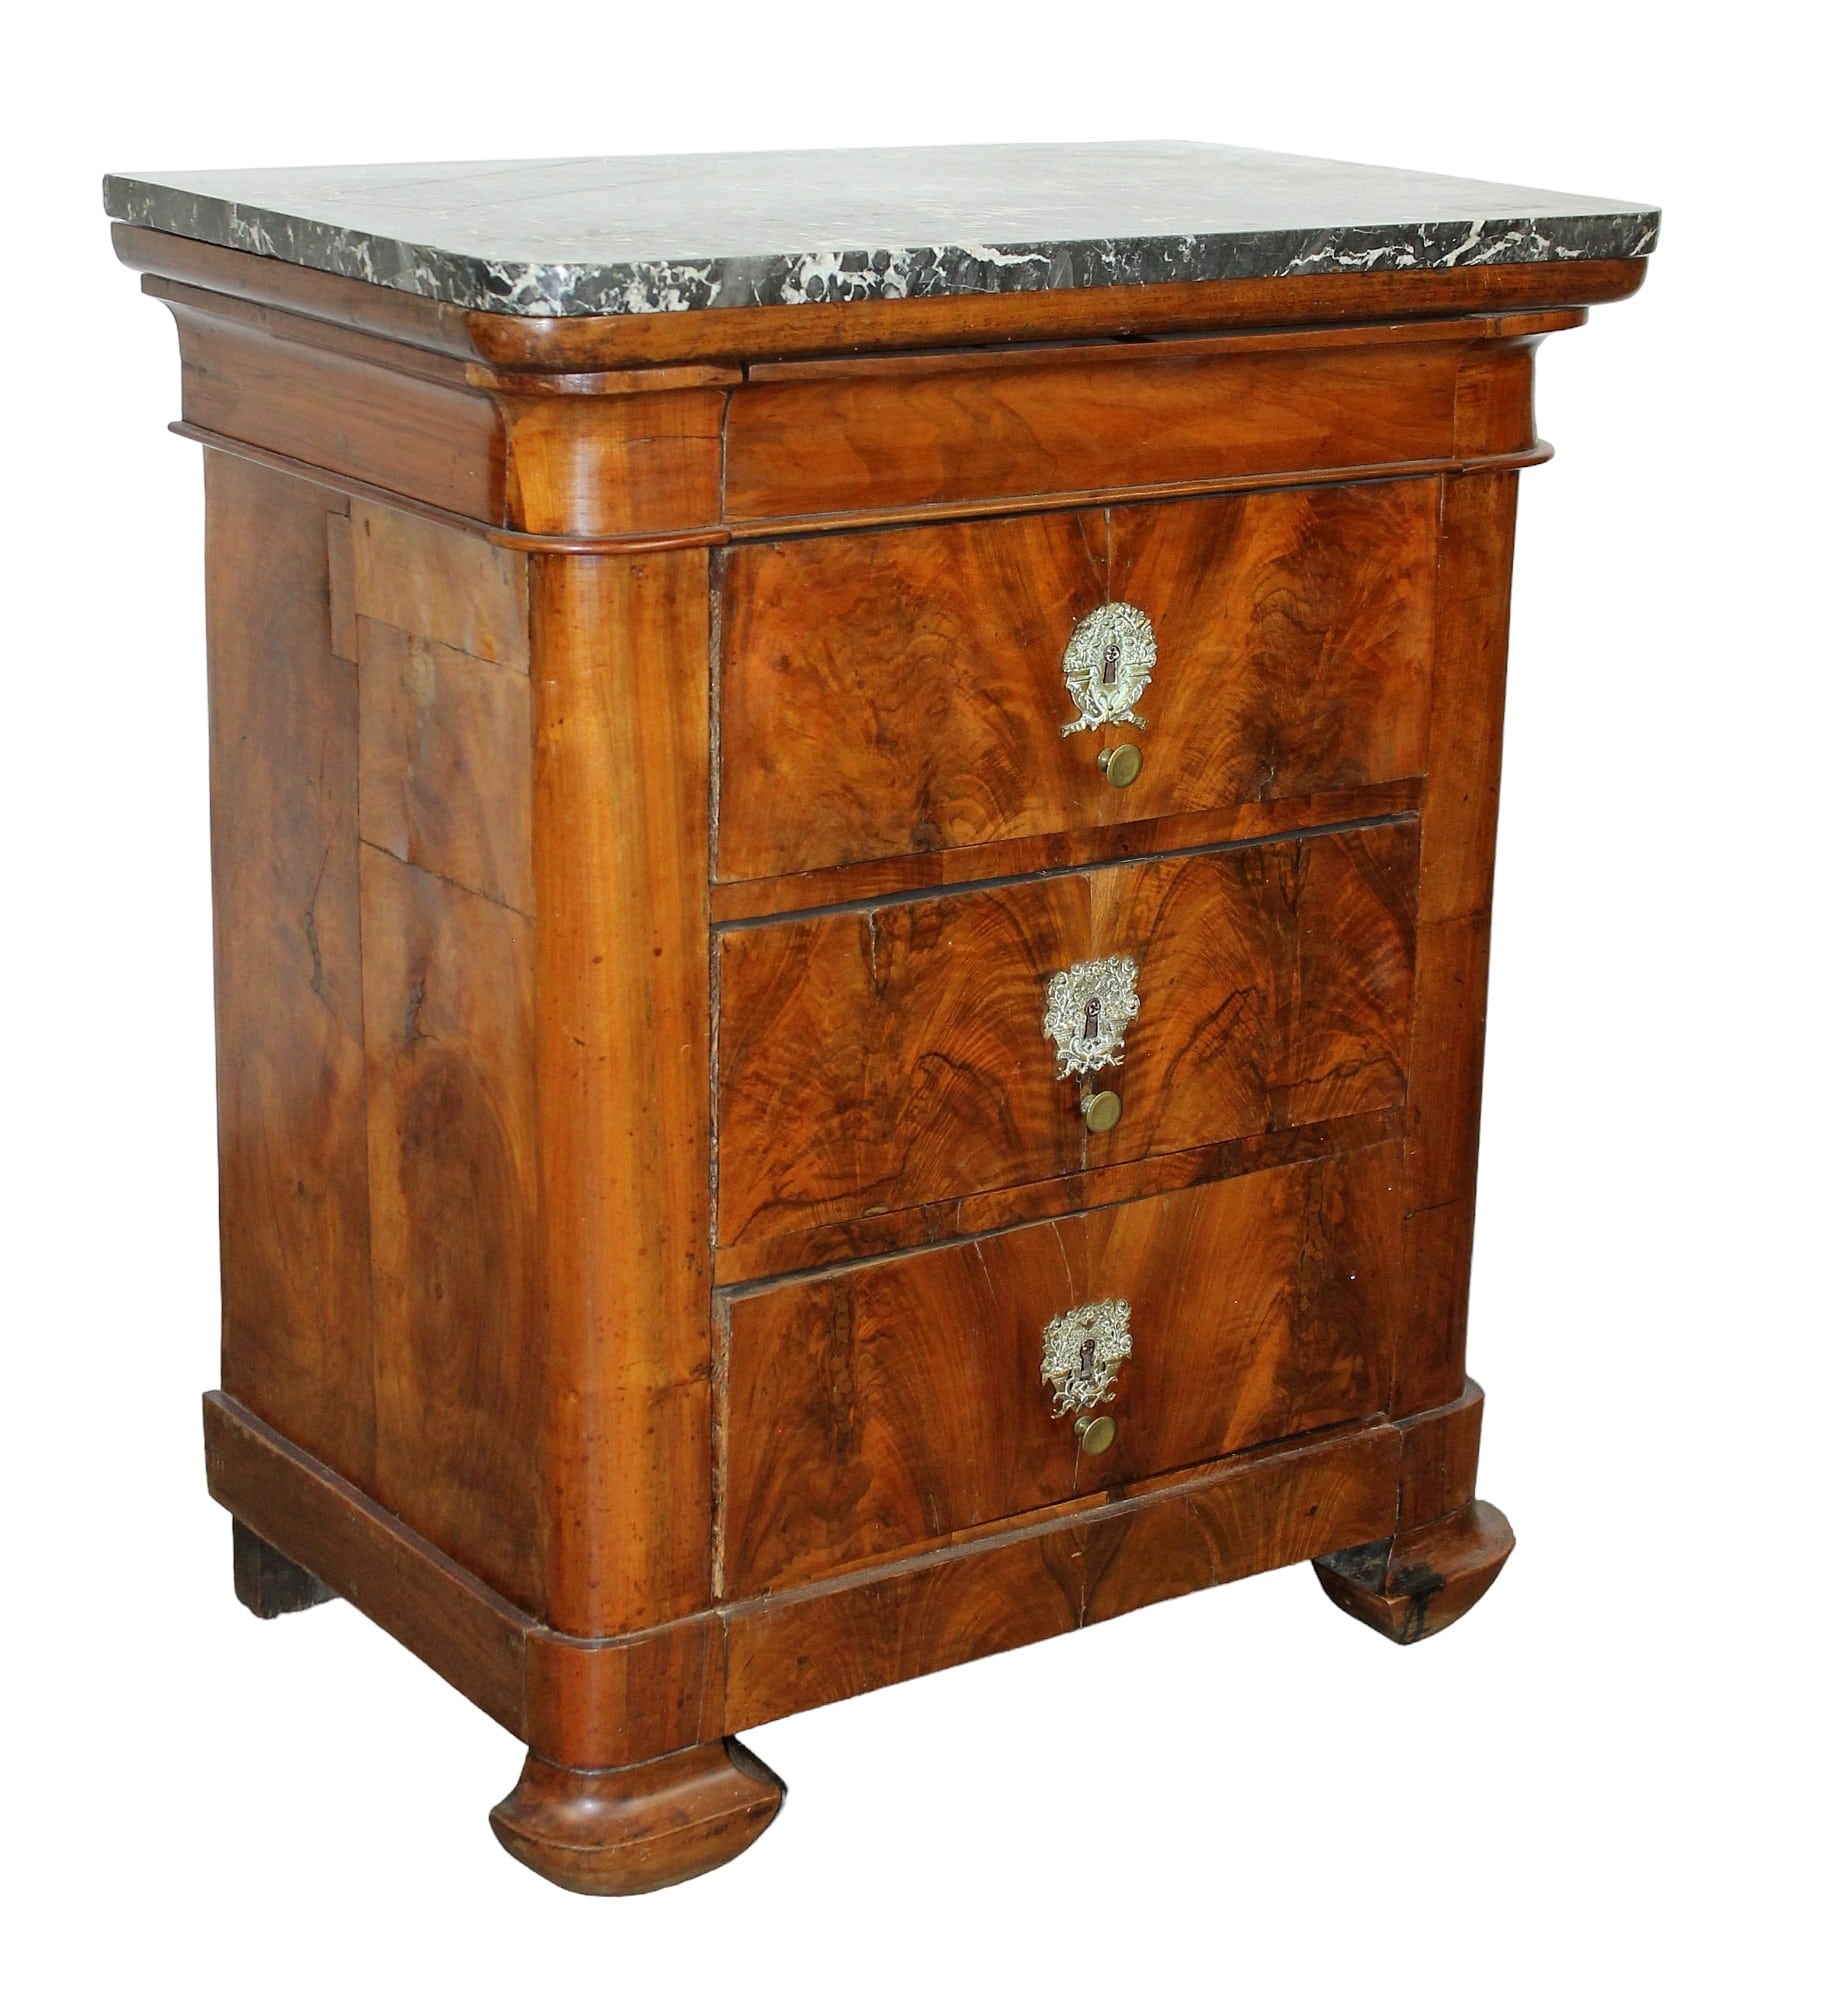 French Empire 3 drawer commode with marble top